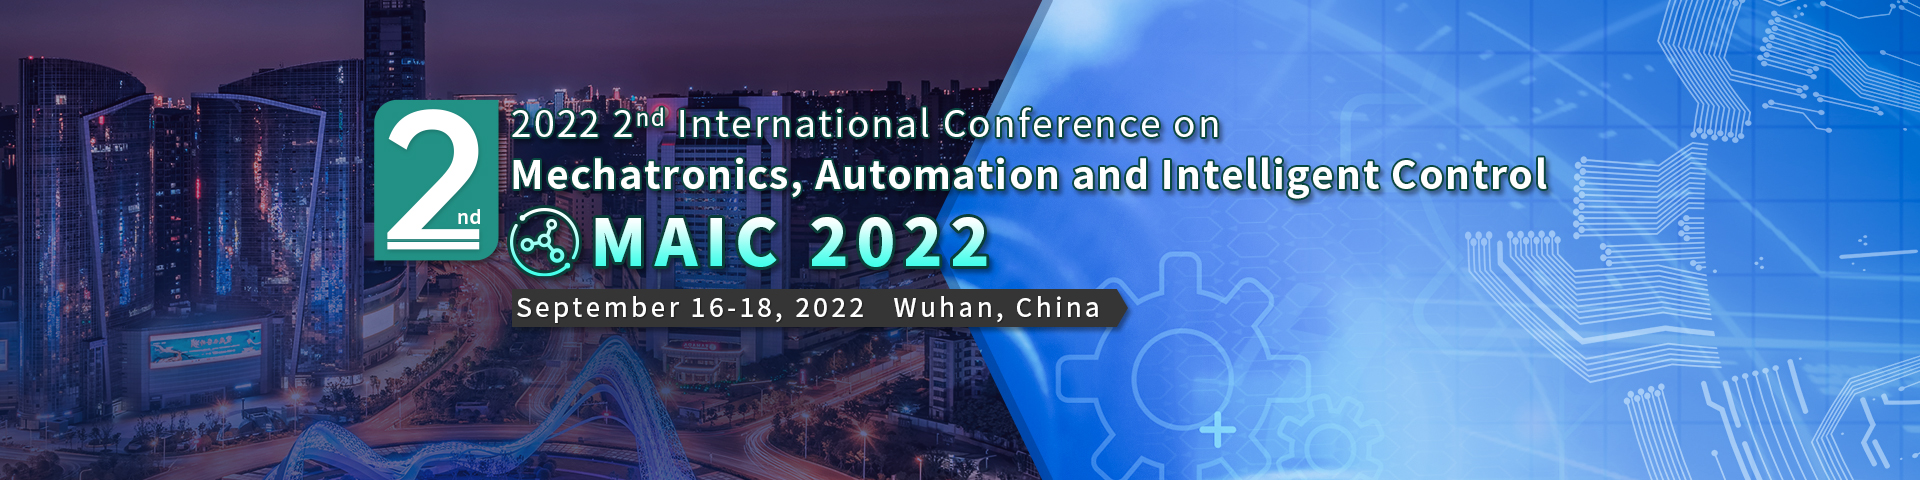 2022 2nd International Conference on Mechatronics, Automation and Intelligent Control(MAIC 2022), Online Event